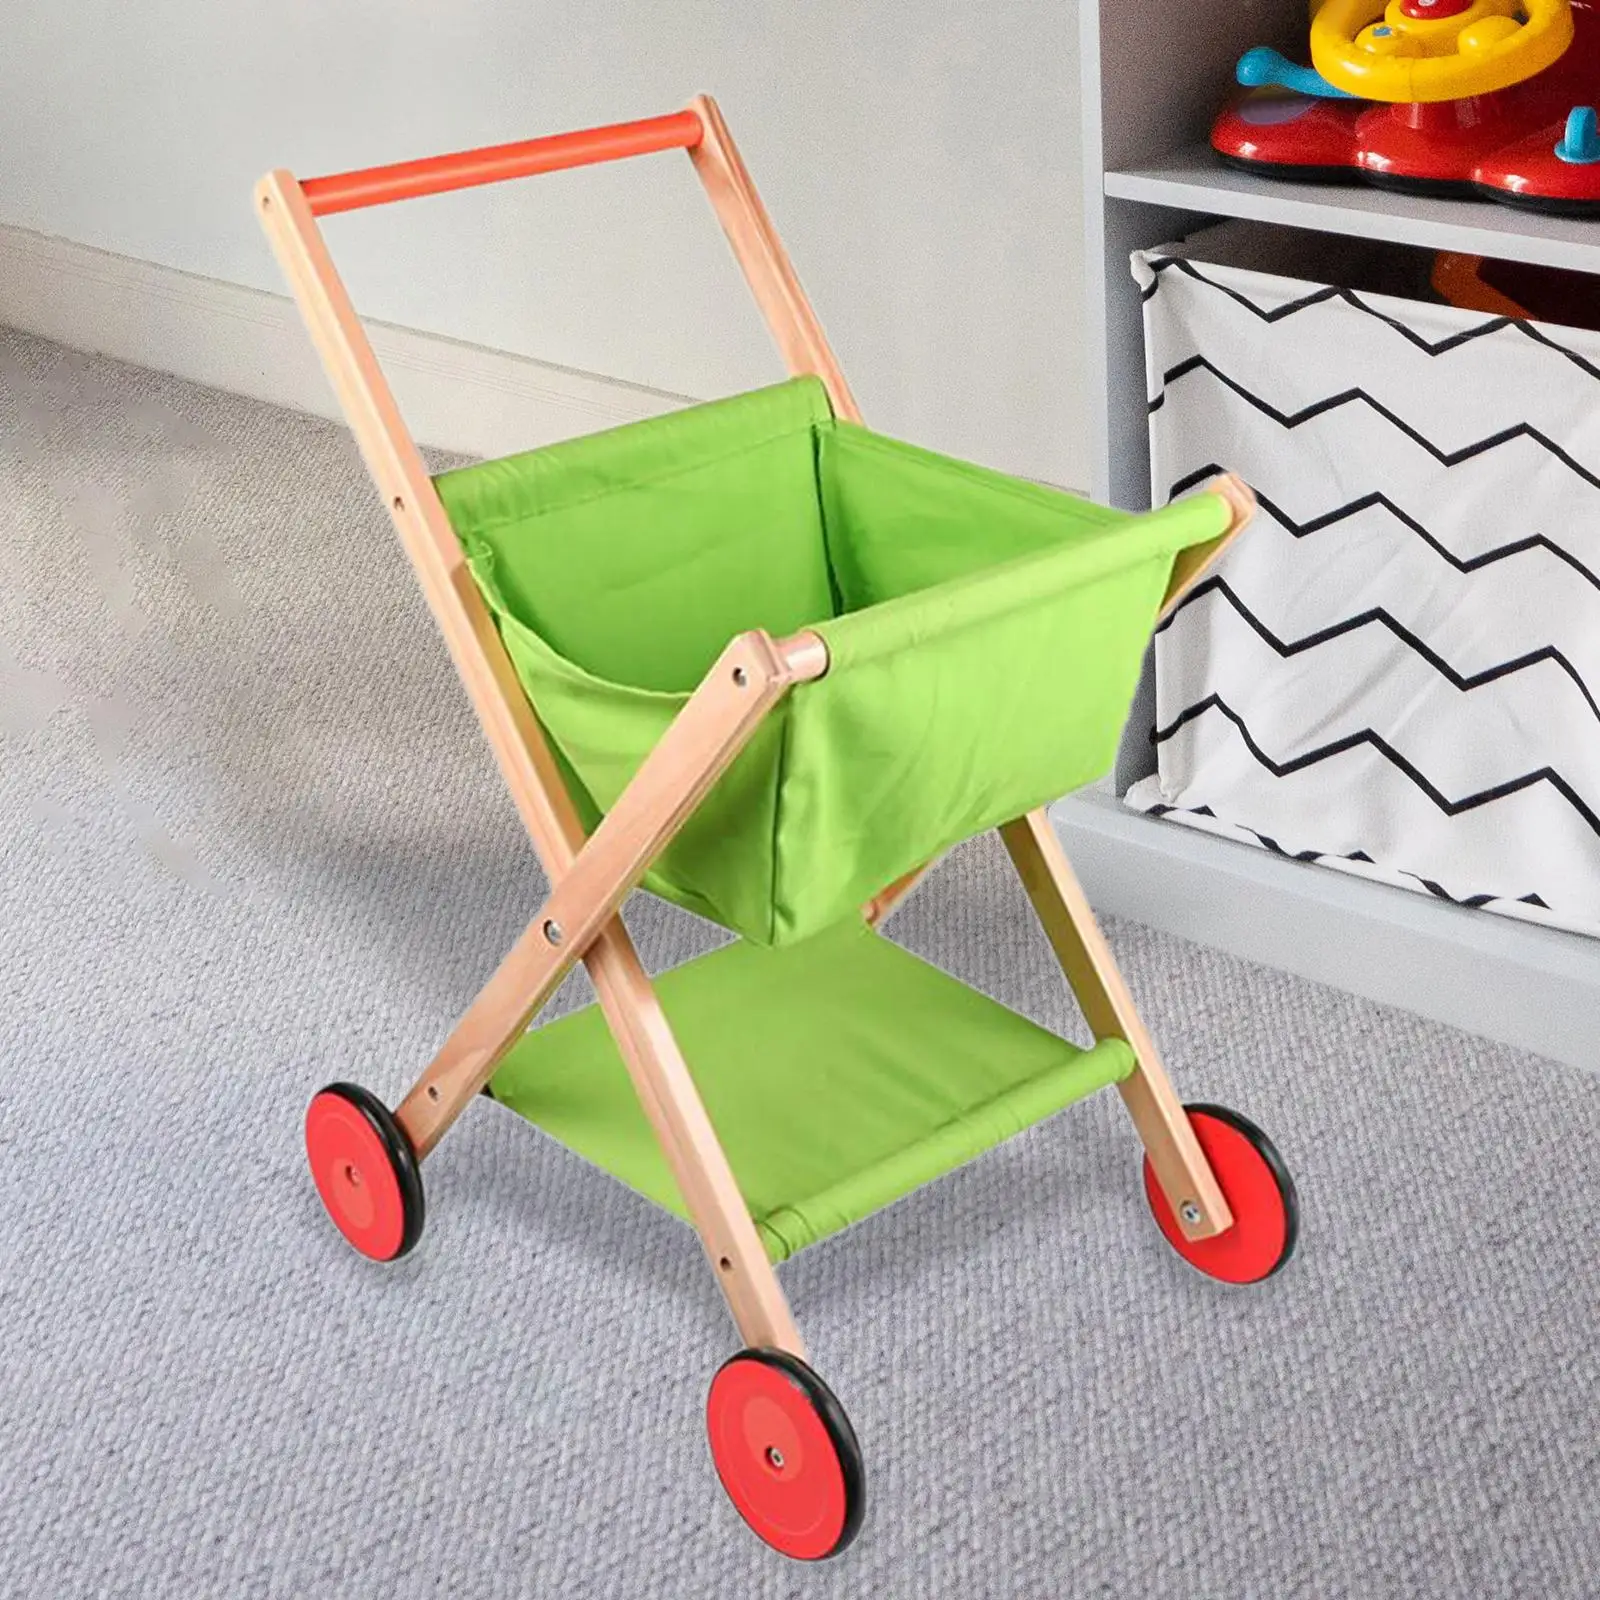 Simulated Grocery Store Shopping Trolley Promotes Creativity and Imagination for Toddler Childern